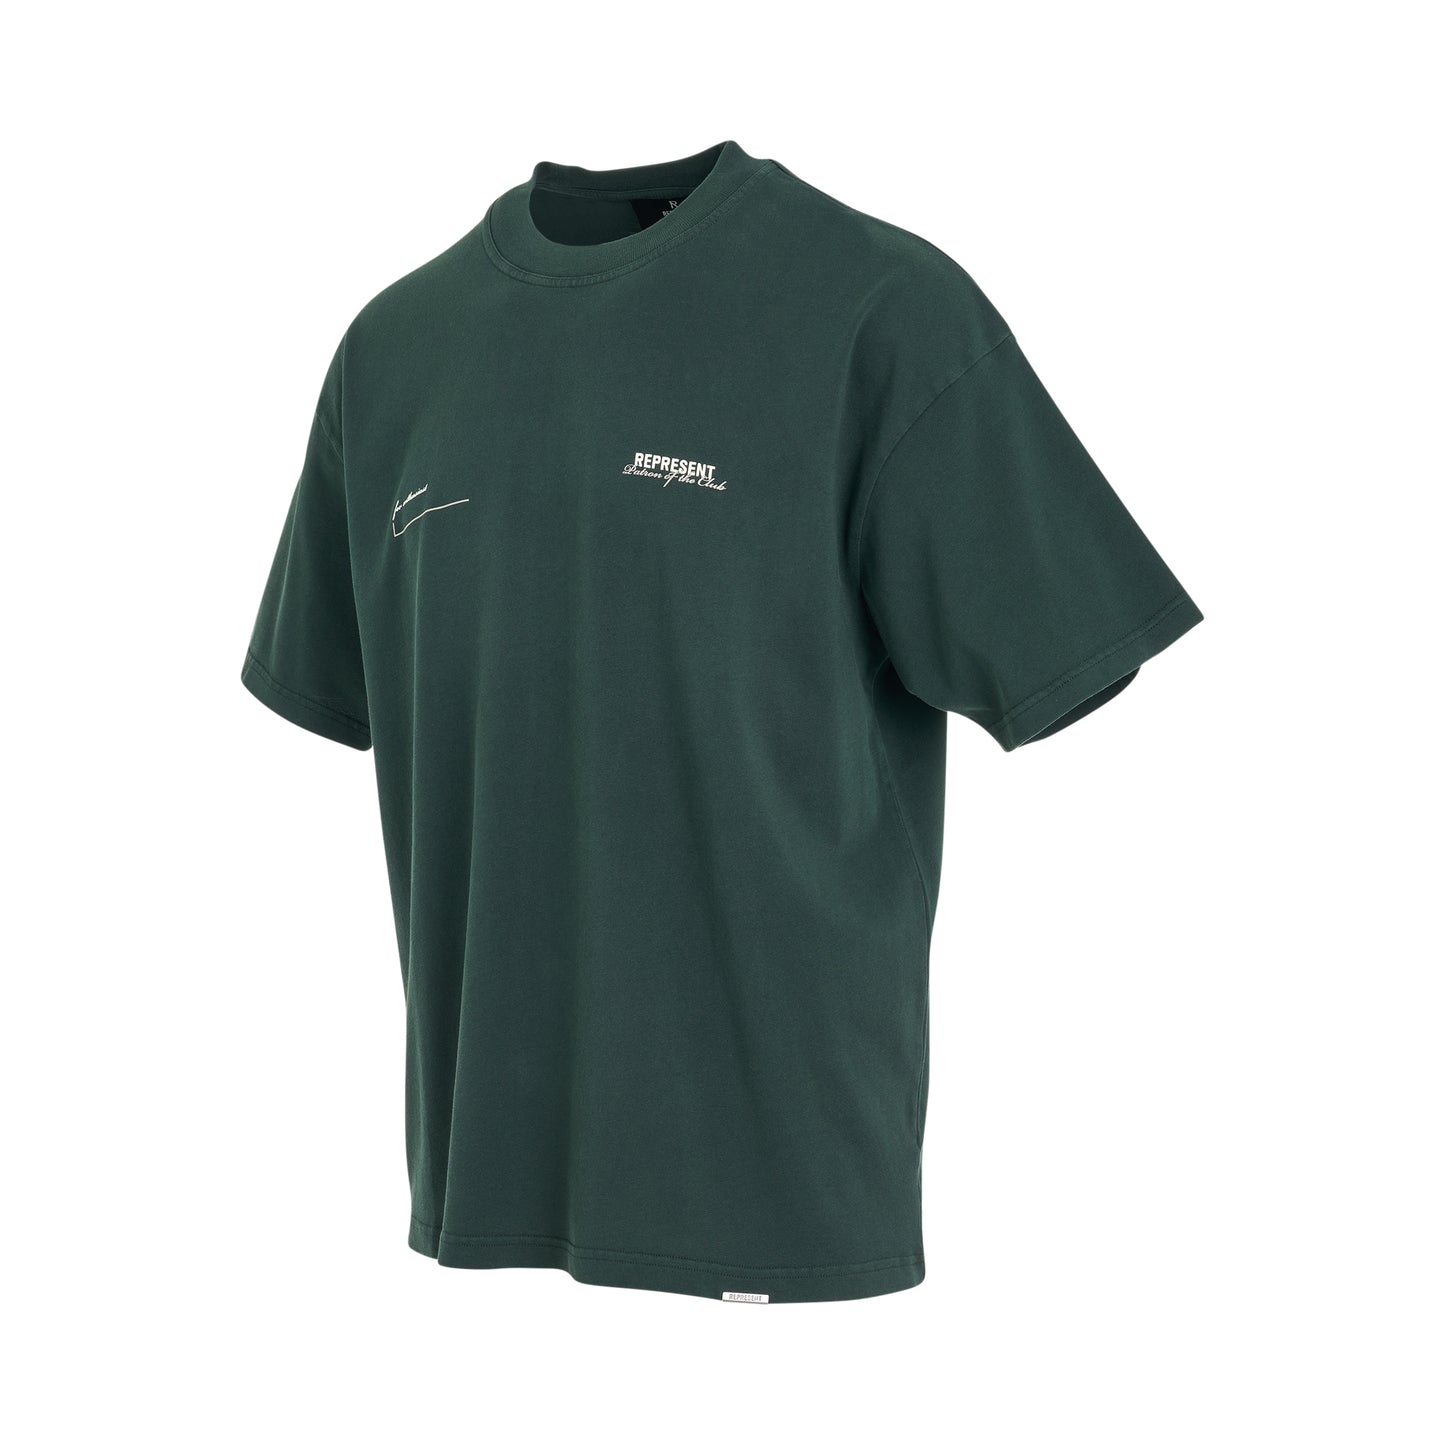 Patron of the Club T-Shirt in Forest Green